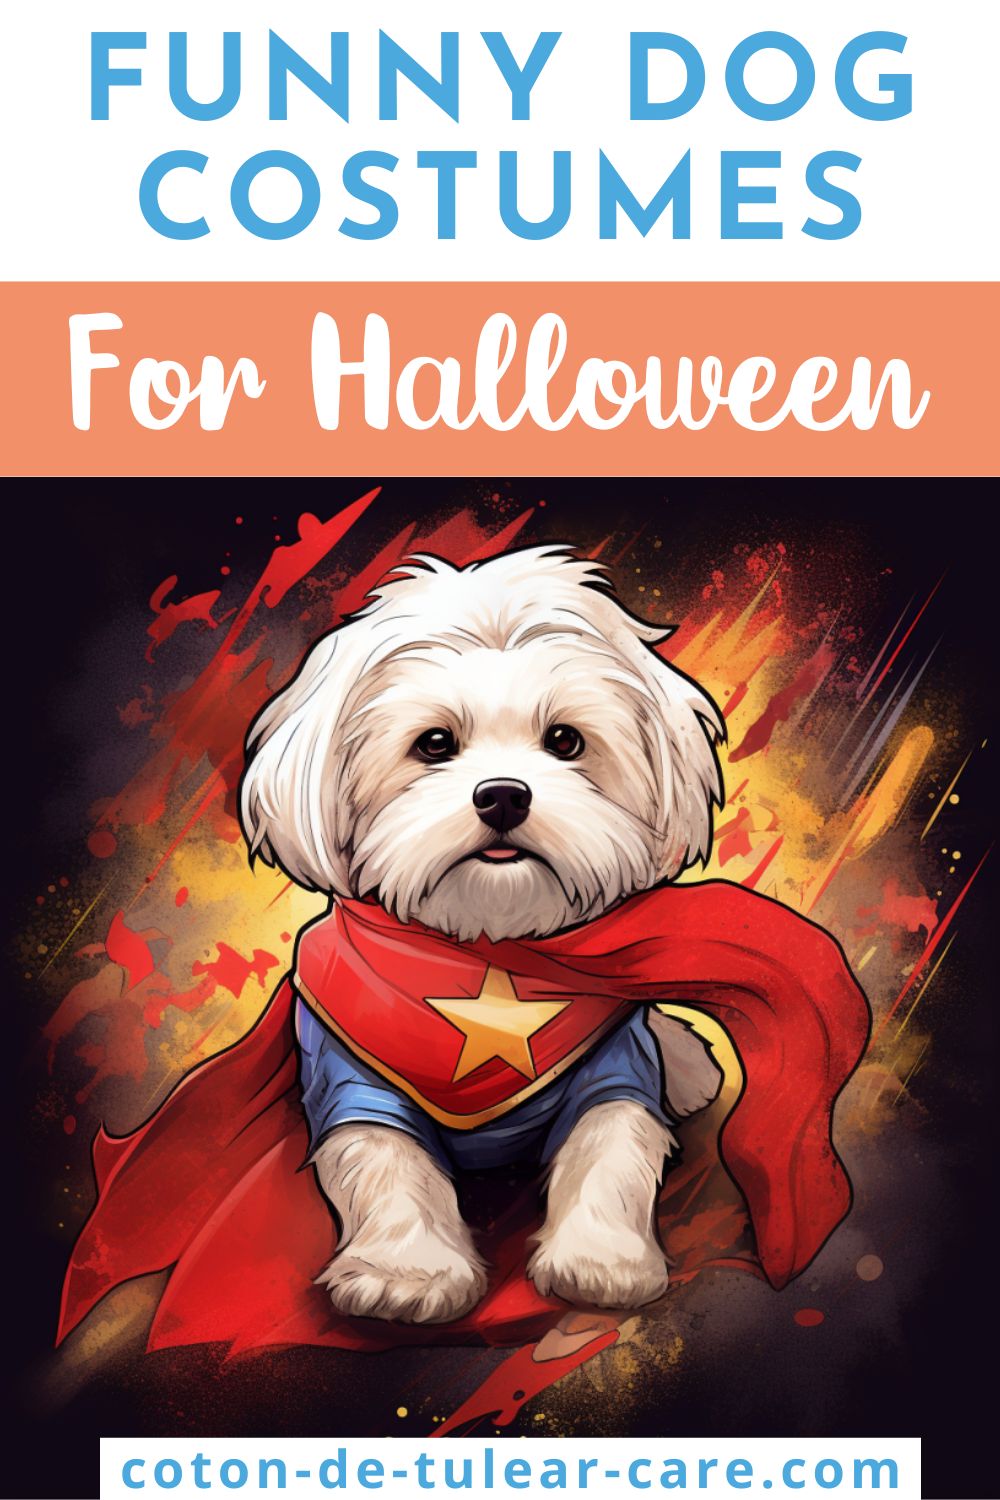 20 Hysterical Dog Costume Ideas